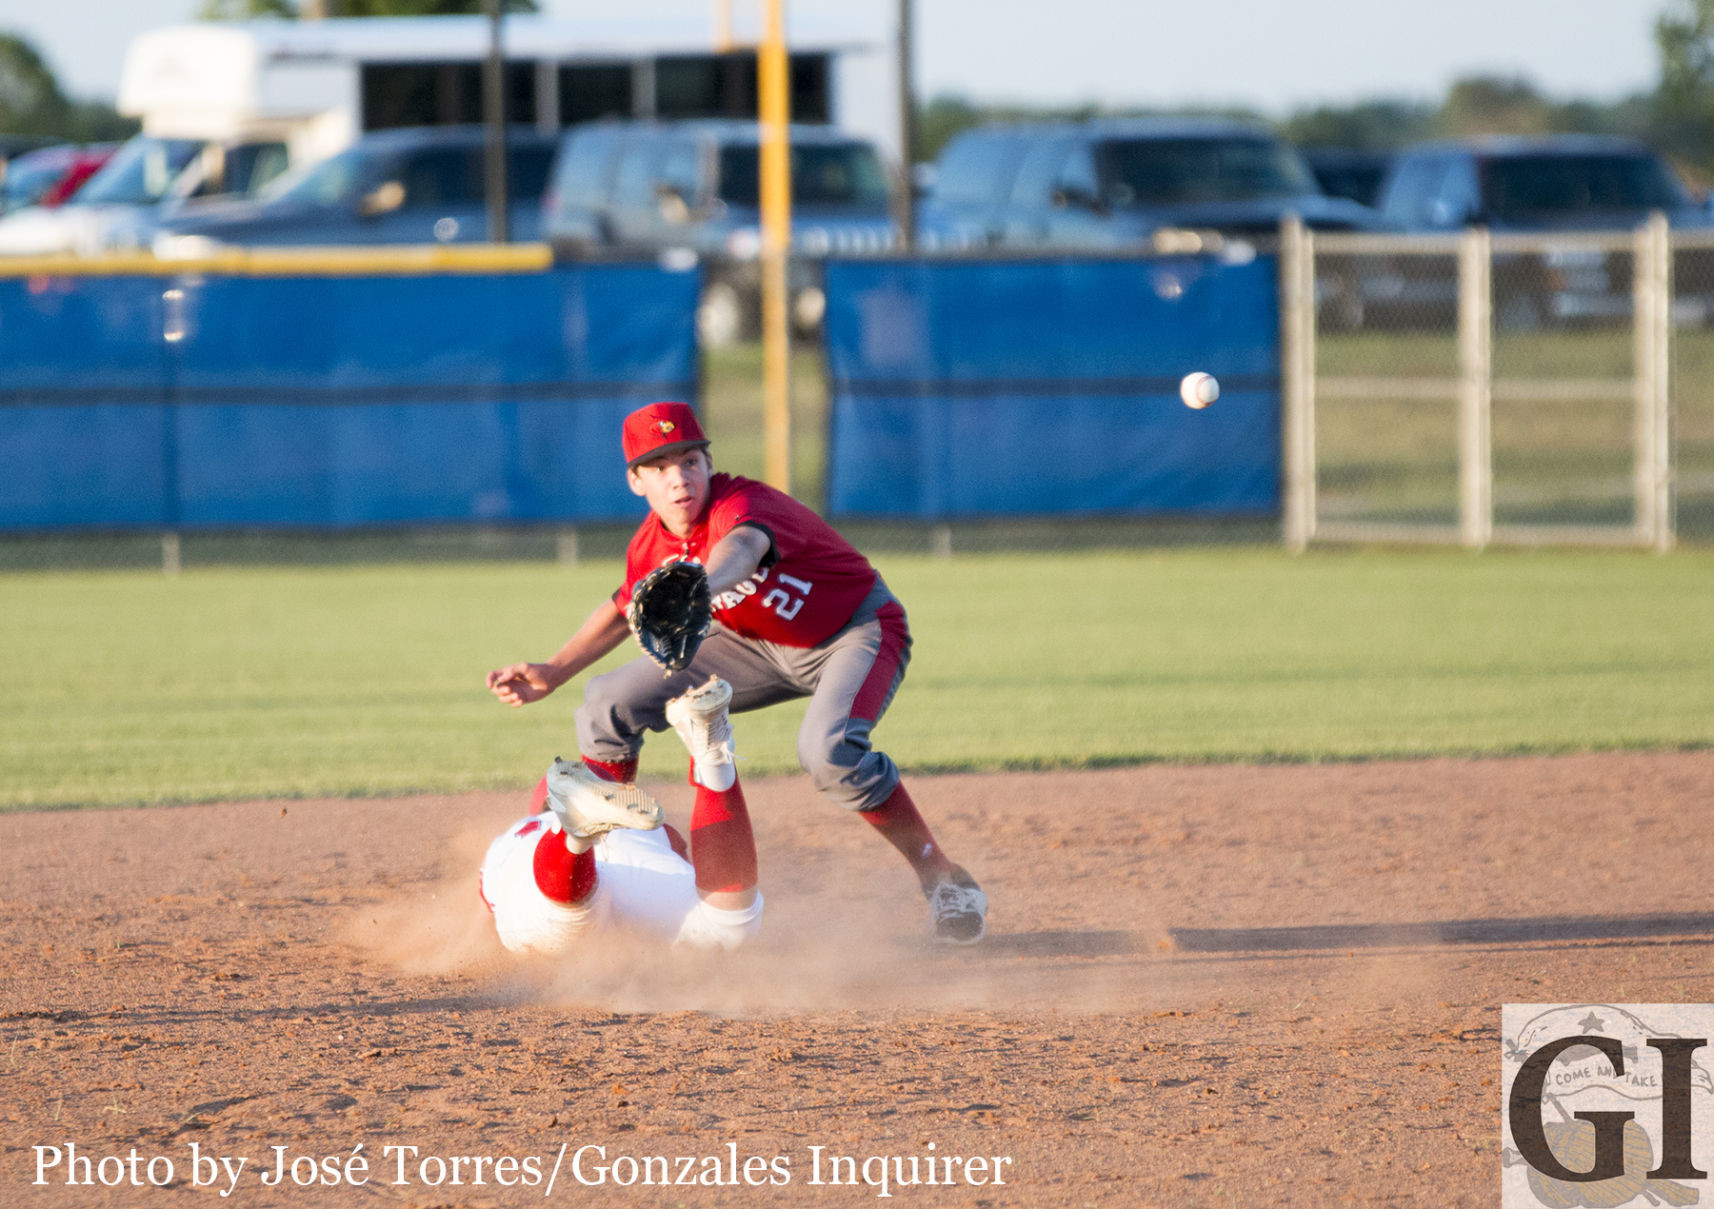 Luke Darilek (21) fields a throw at second in St. Paul’s 5-0 loss against Pasadena First Baptist in the bi-district round of playoffs.